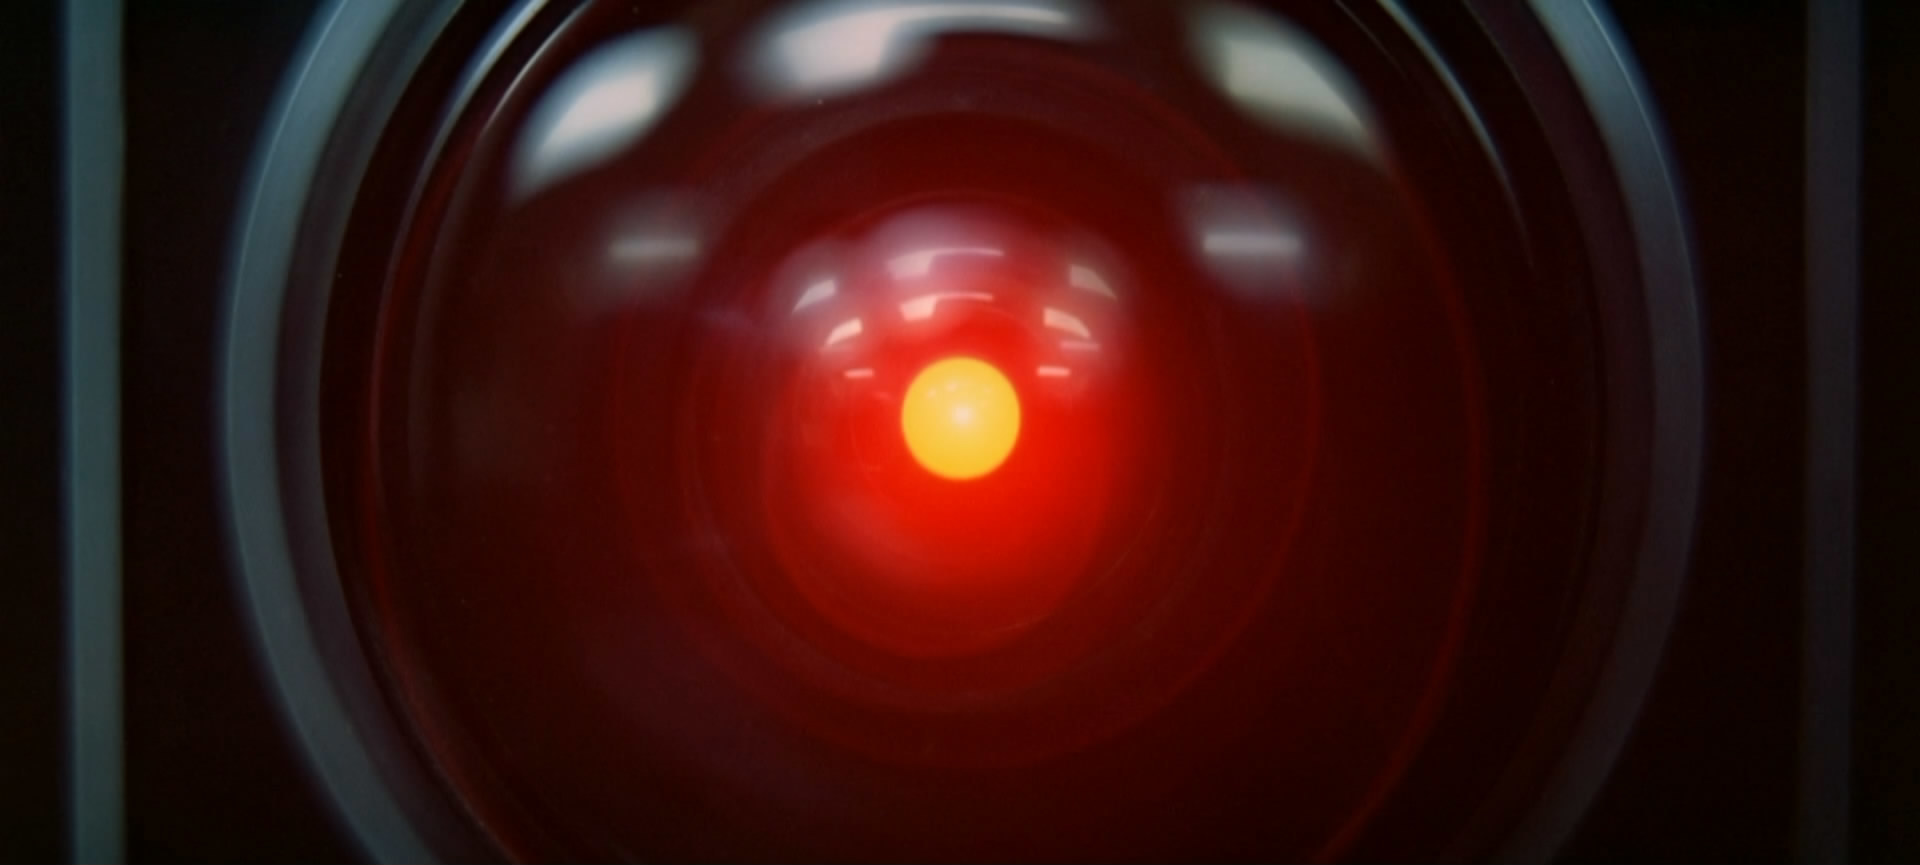 Space Wallpaper on 2001 A Space Odyssey Hal 9000 Hd Wallpaper   Space   Planets   217668